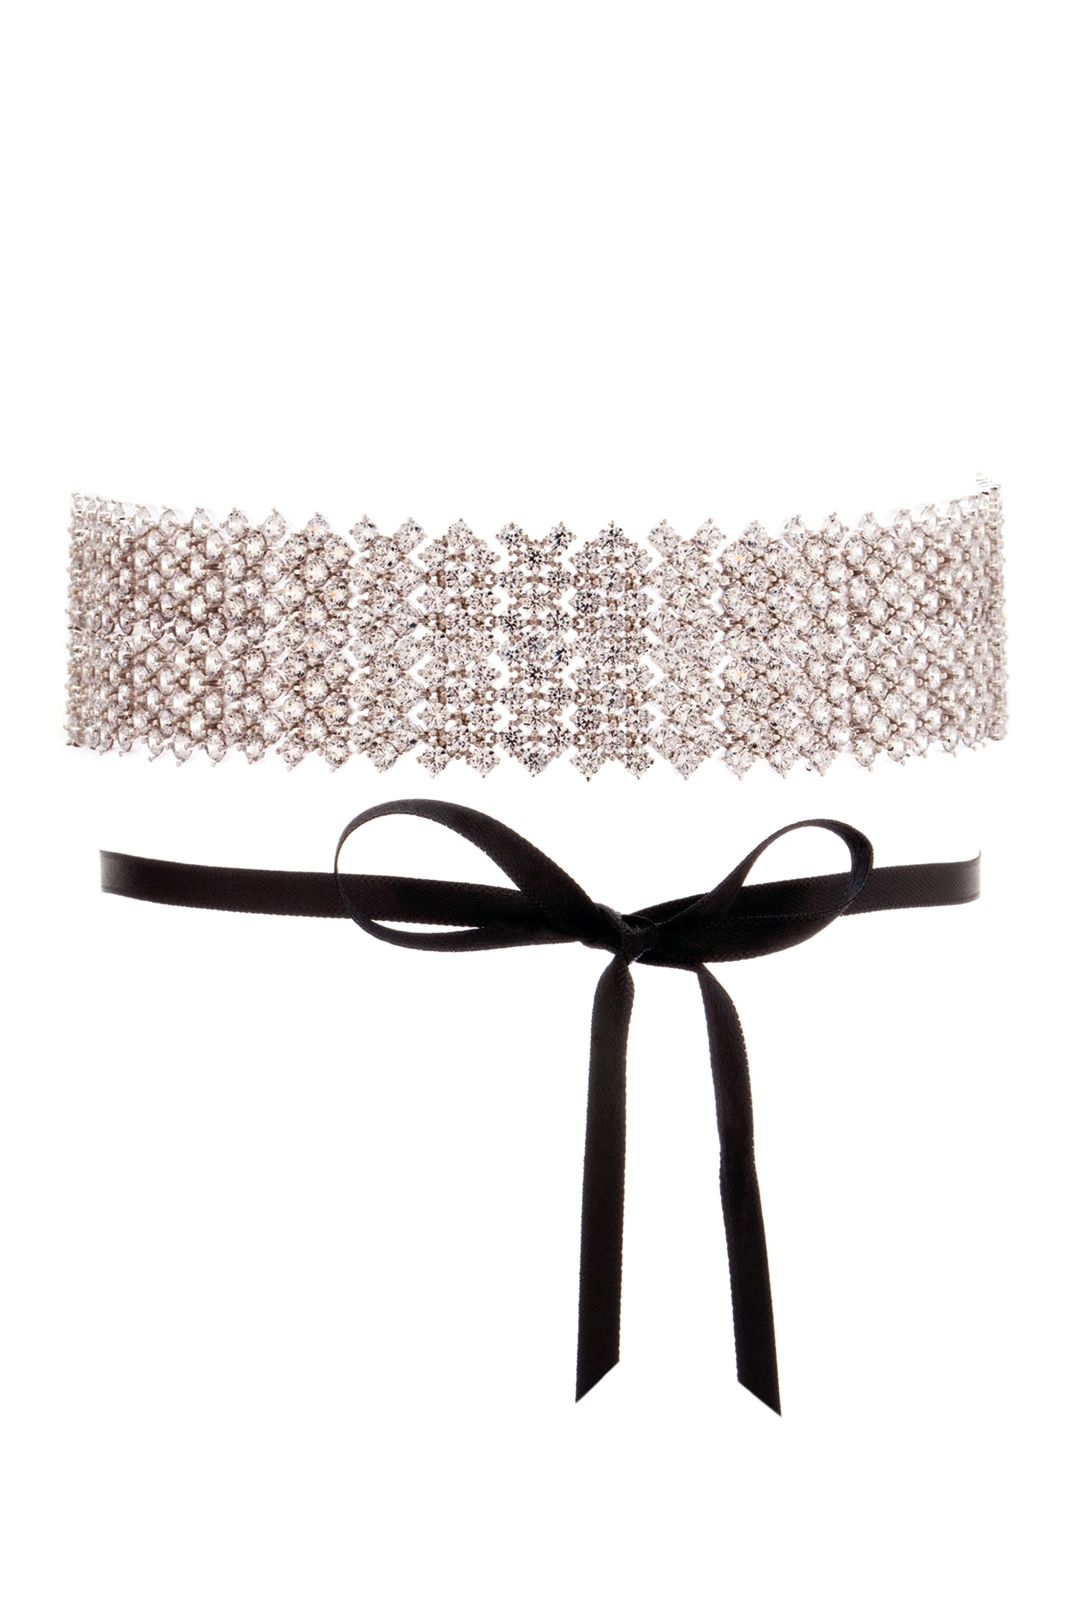 Amber Sceats - Grand Miley Choker - Silver Black - Front